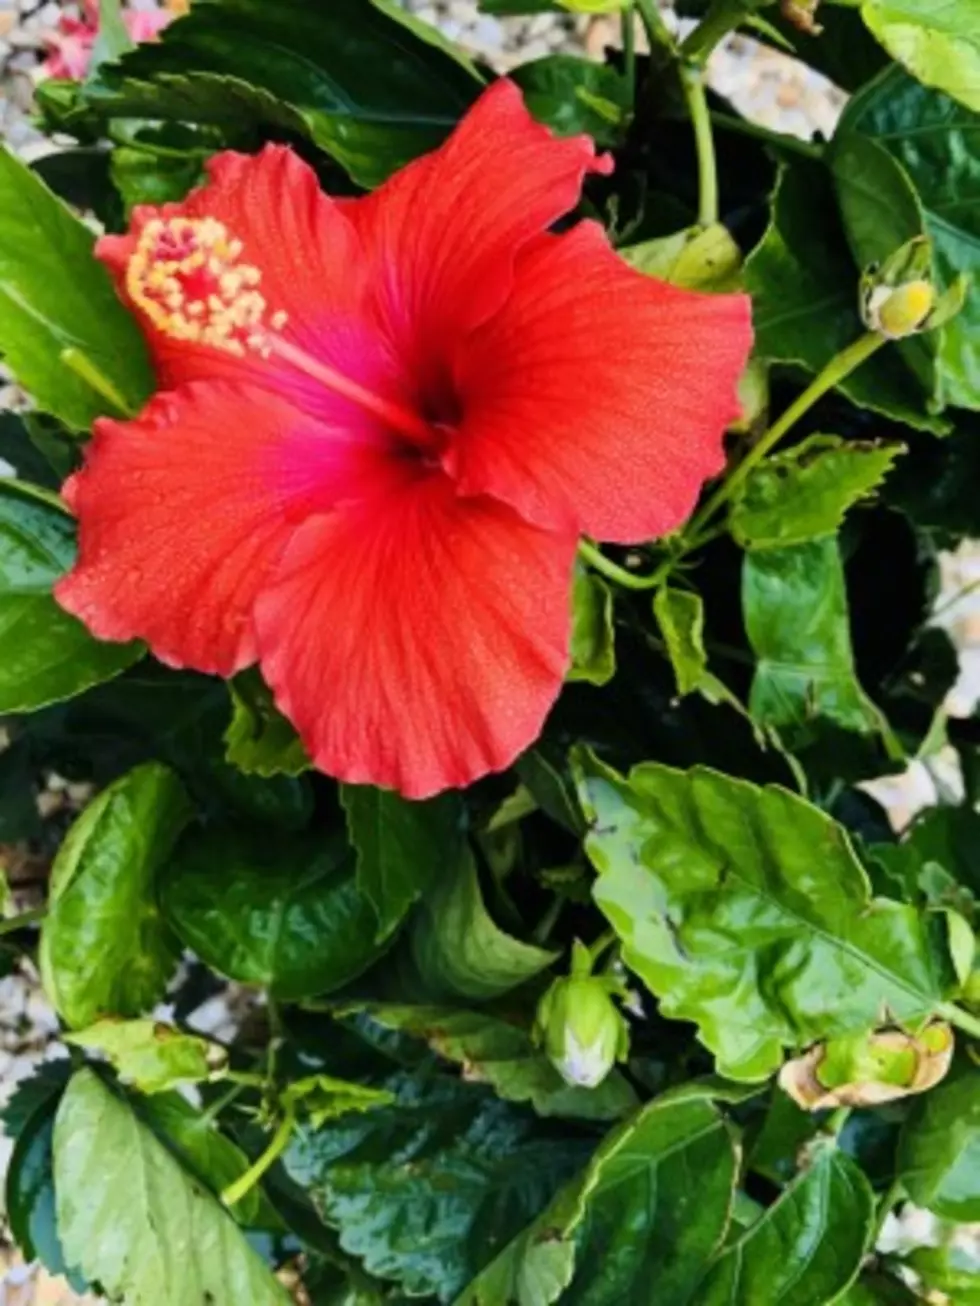 My Tropical Plants I Need Every Year for my Summer Paradise[Photo Gallery]